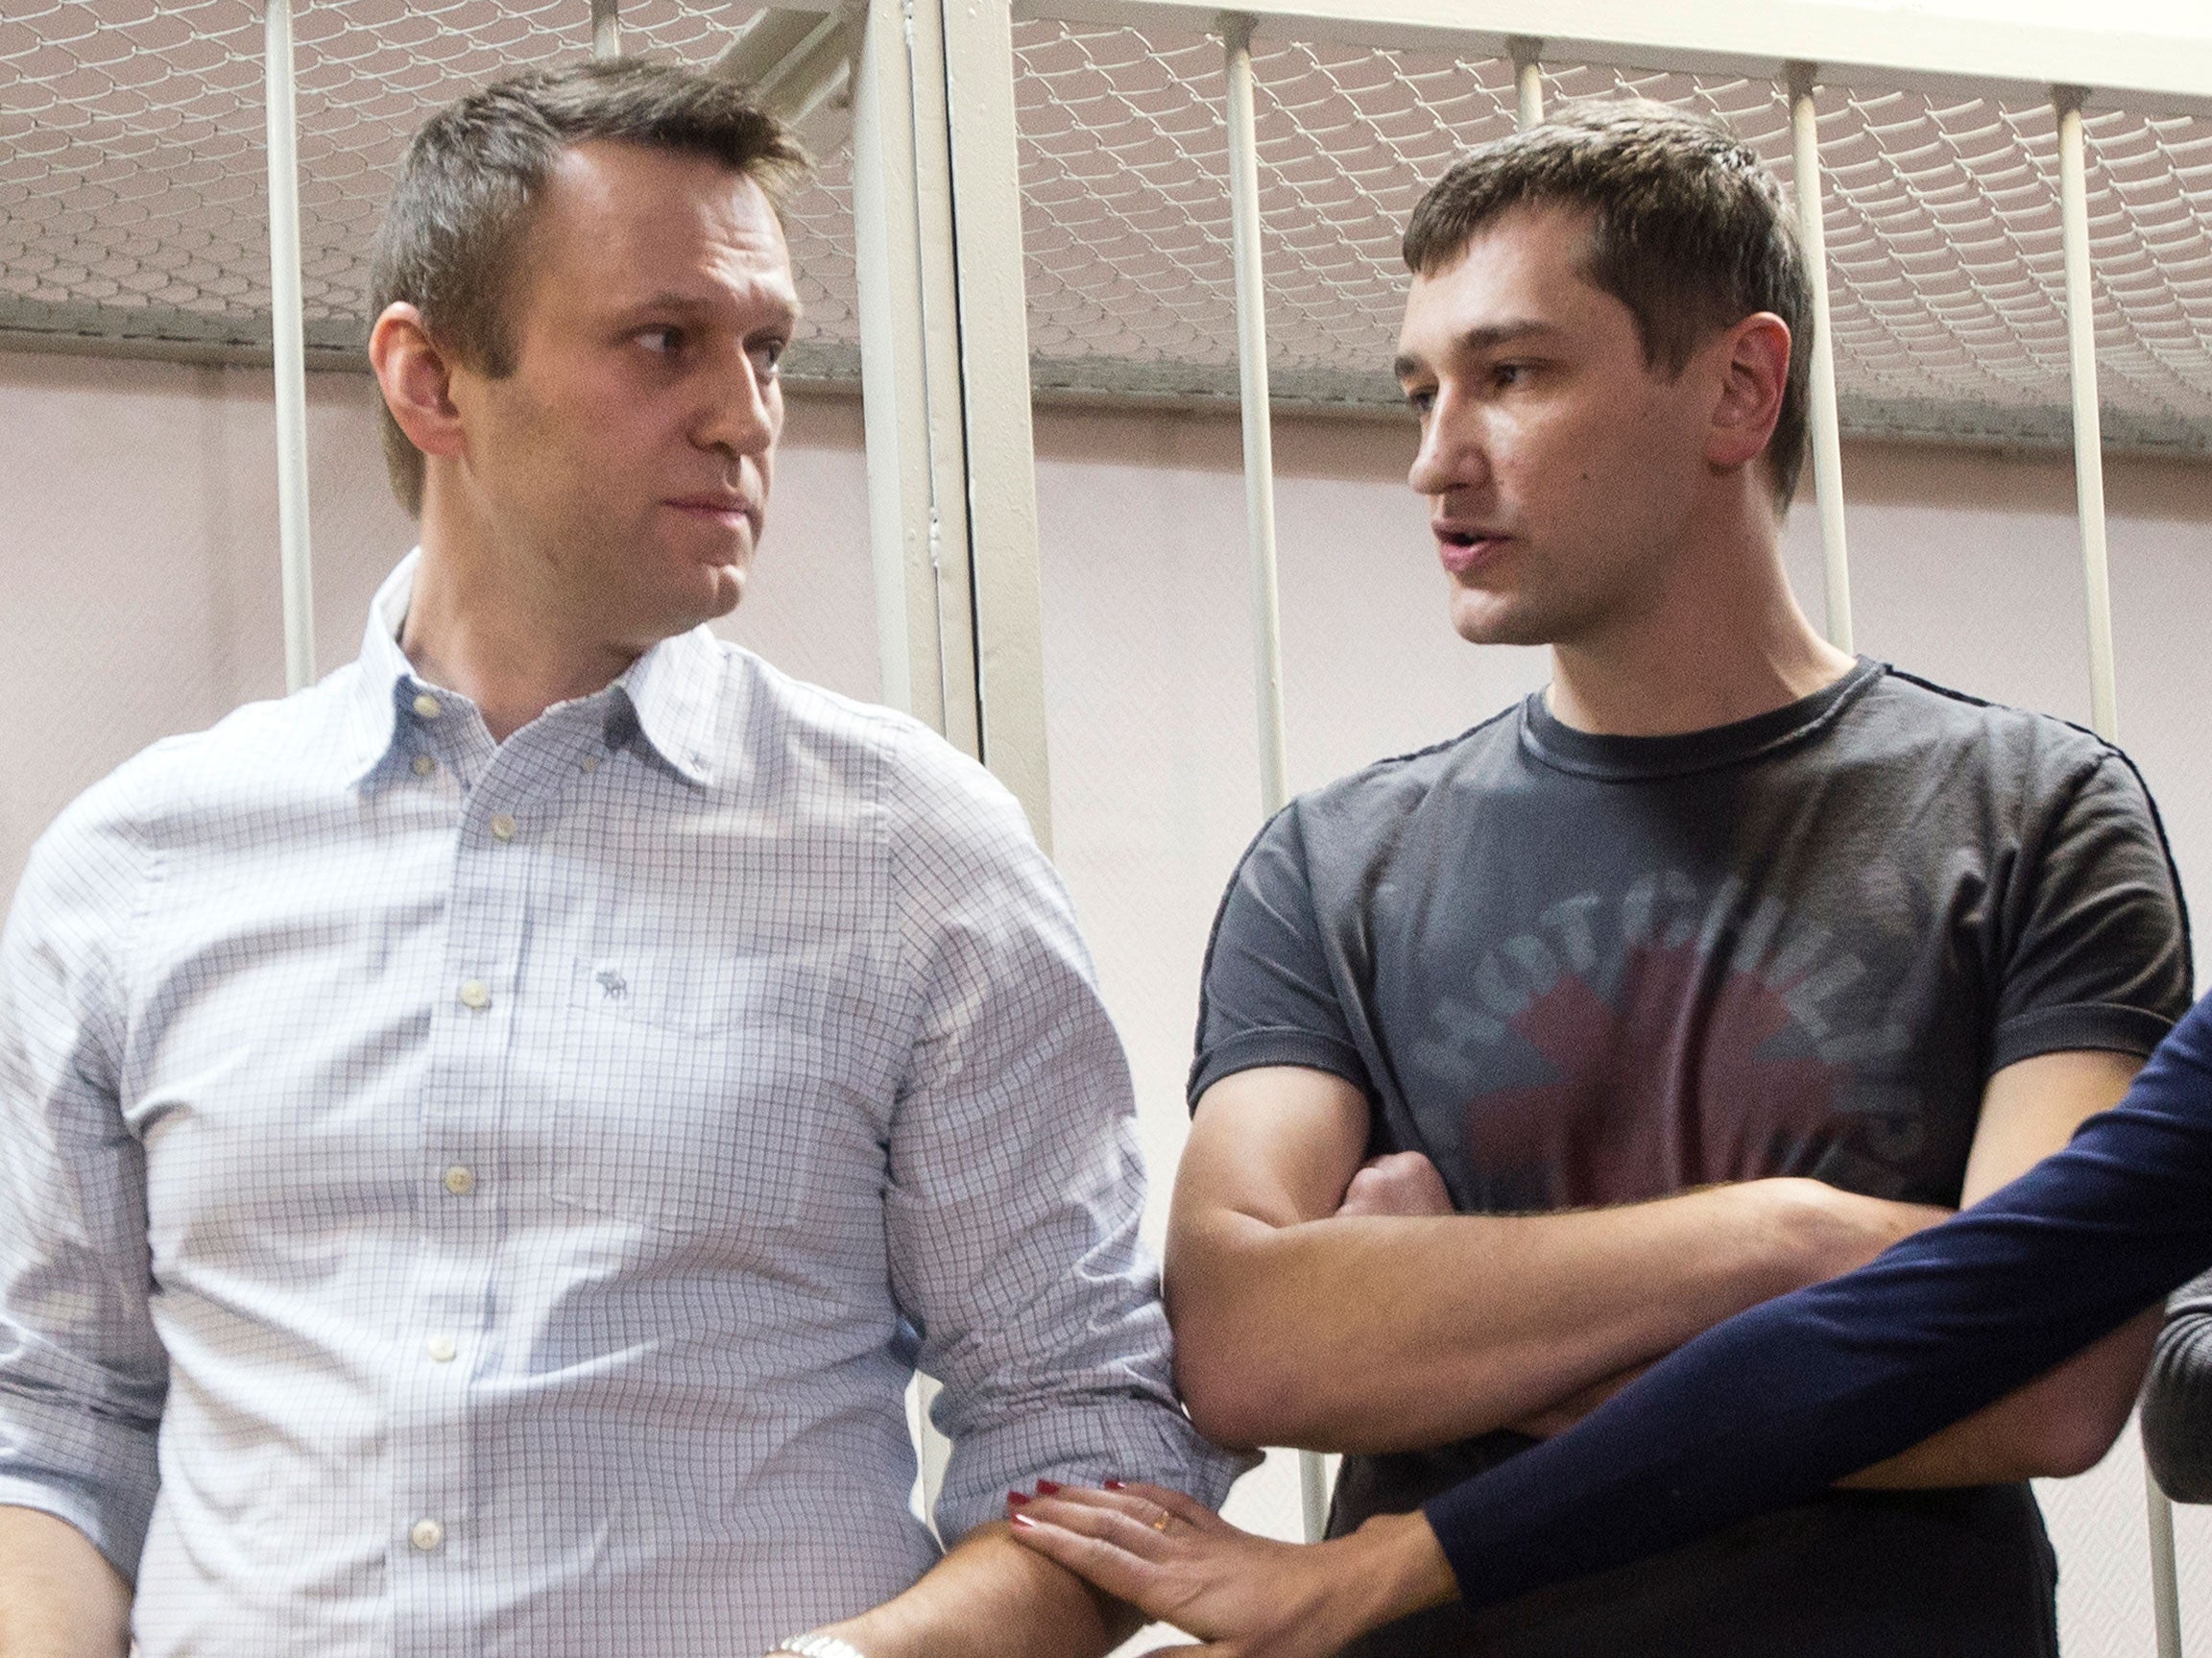 Russian opposition activist Alexei Navalny and his brother Oleg Navalny at a court in Moscow, Russia, Tuesday, Dec. 30, 2014